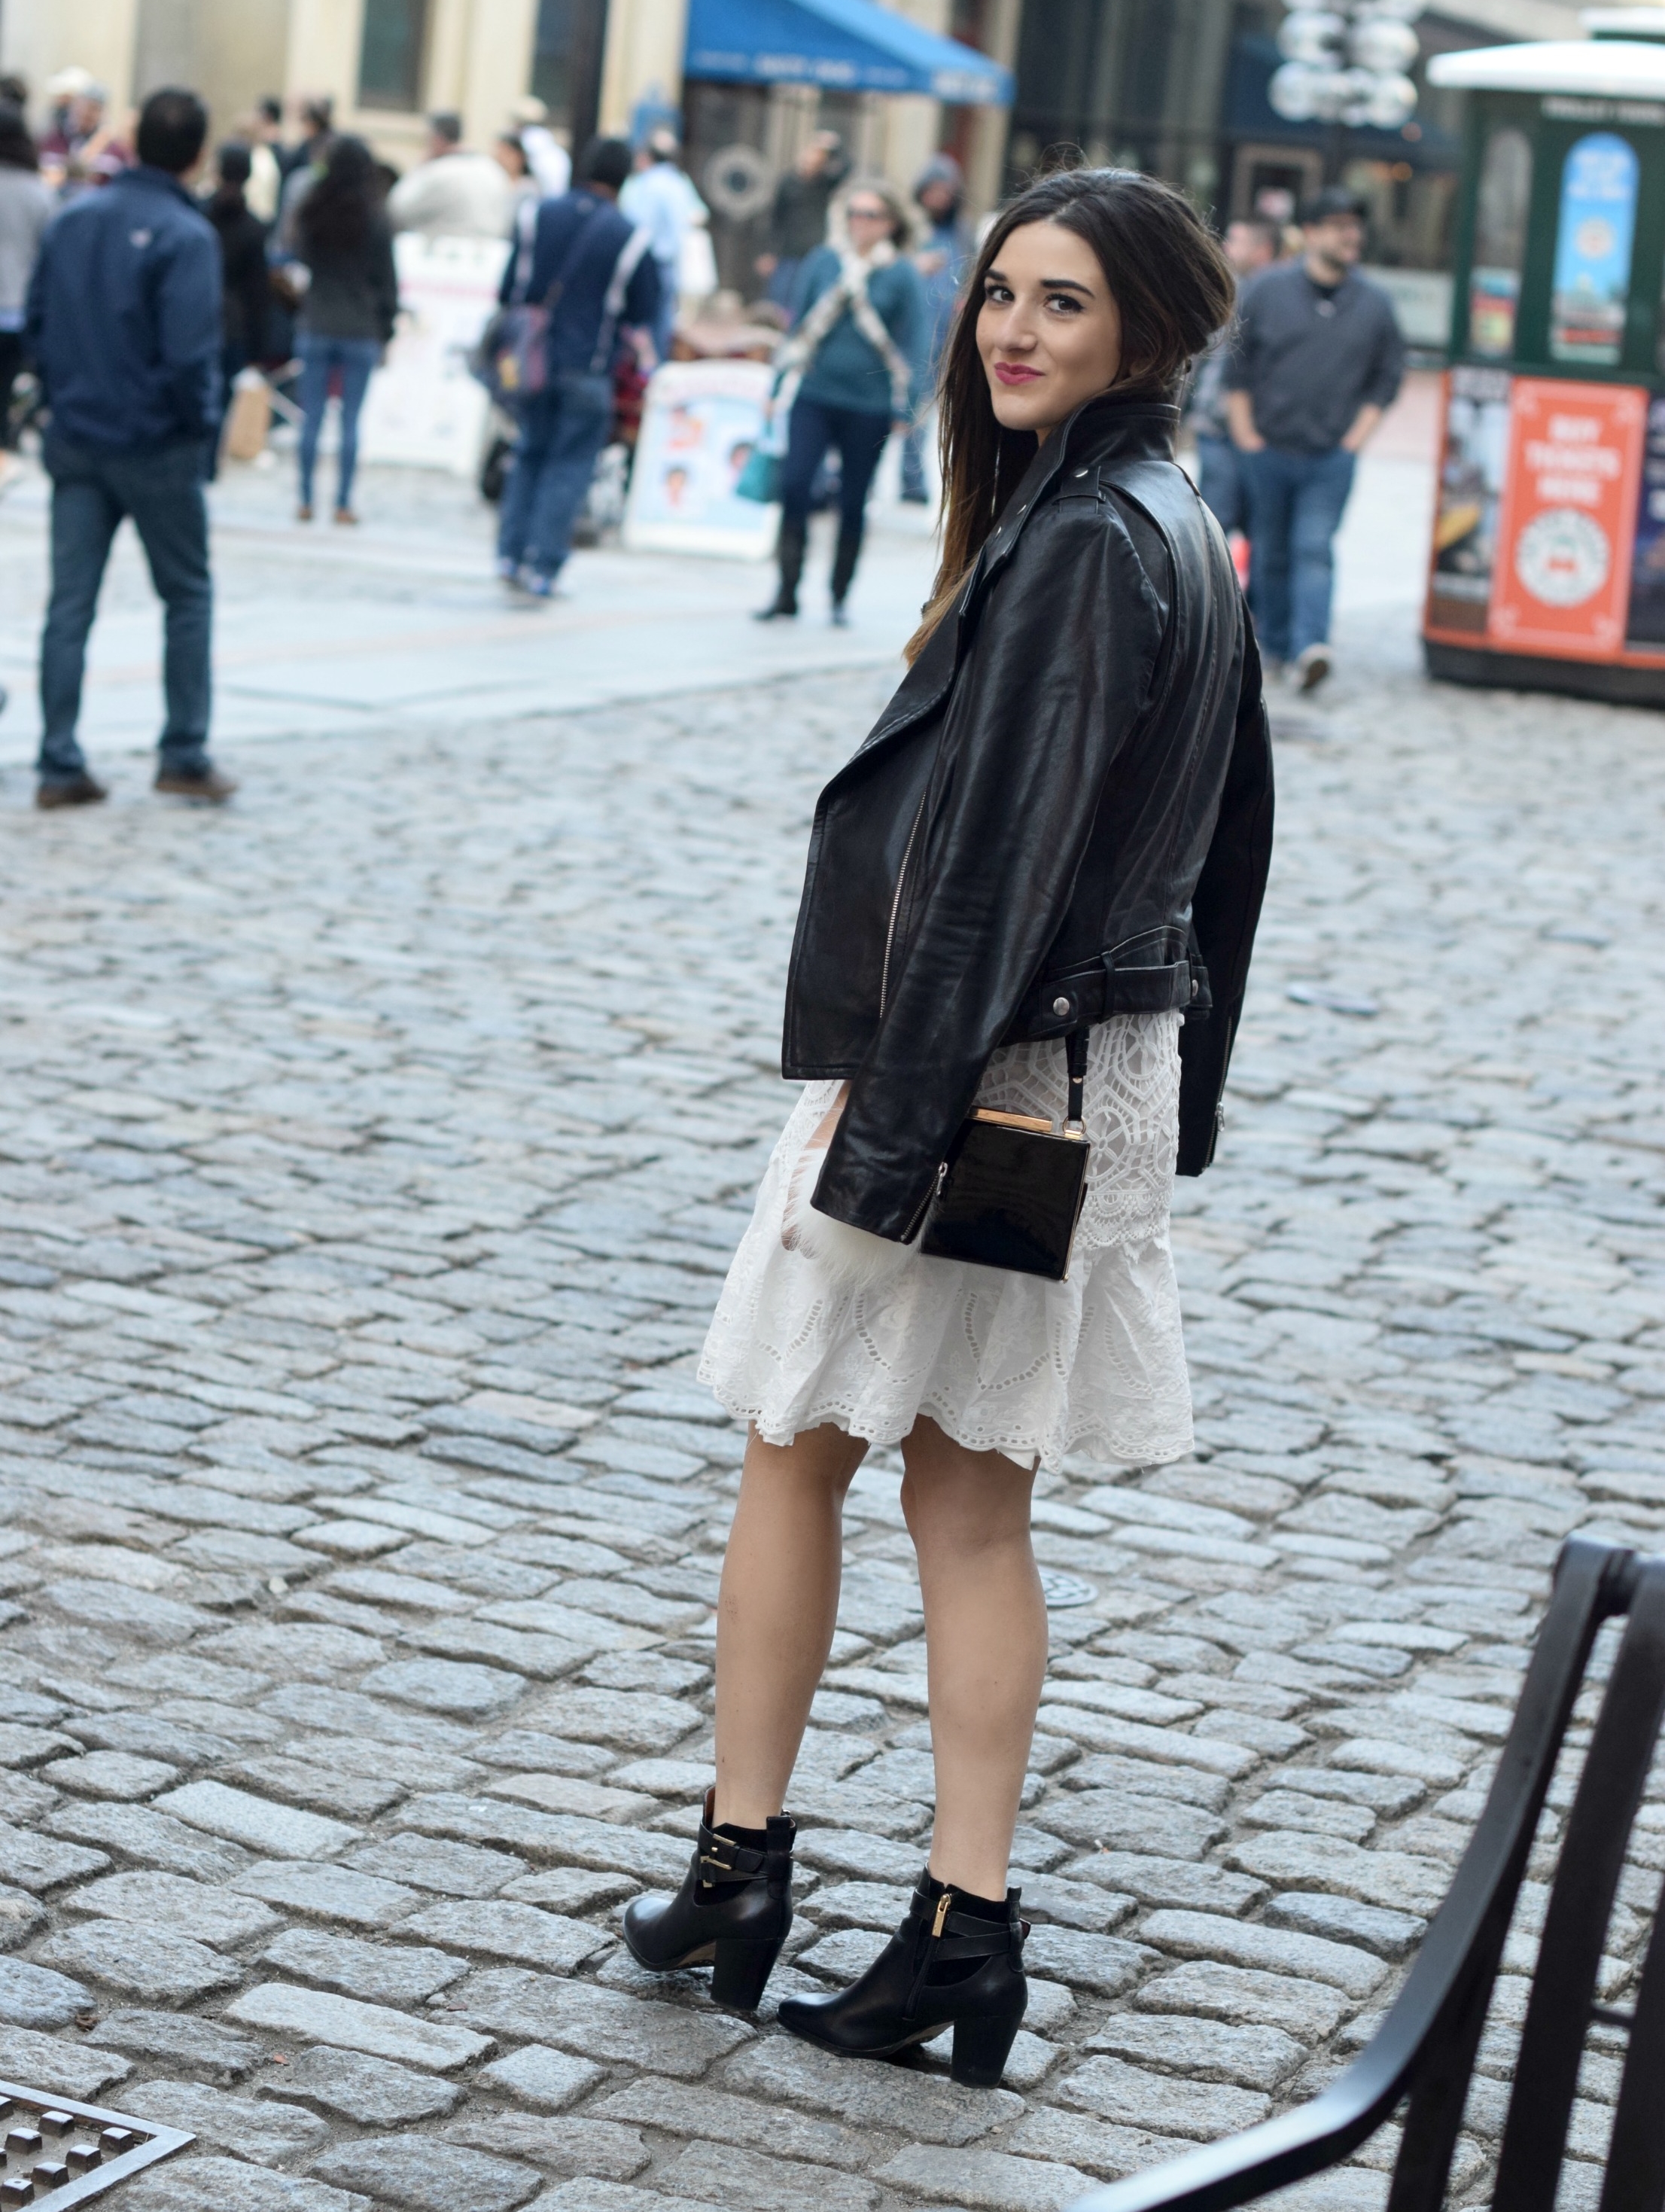 Desigual White Lace Dress Mackage Moto Jacket Louboutins & Love Fashion Blog Esther Santer NYC Street Style Blogger Outfit OOTD Black Booties Nordstrom Shoes Inspo Photoshoot Boston Leather Bag Pom Pom Model Girl Women Hair Fall Look Beautiful Pretty.jpg